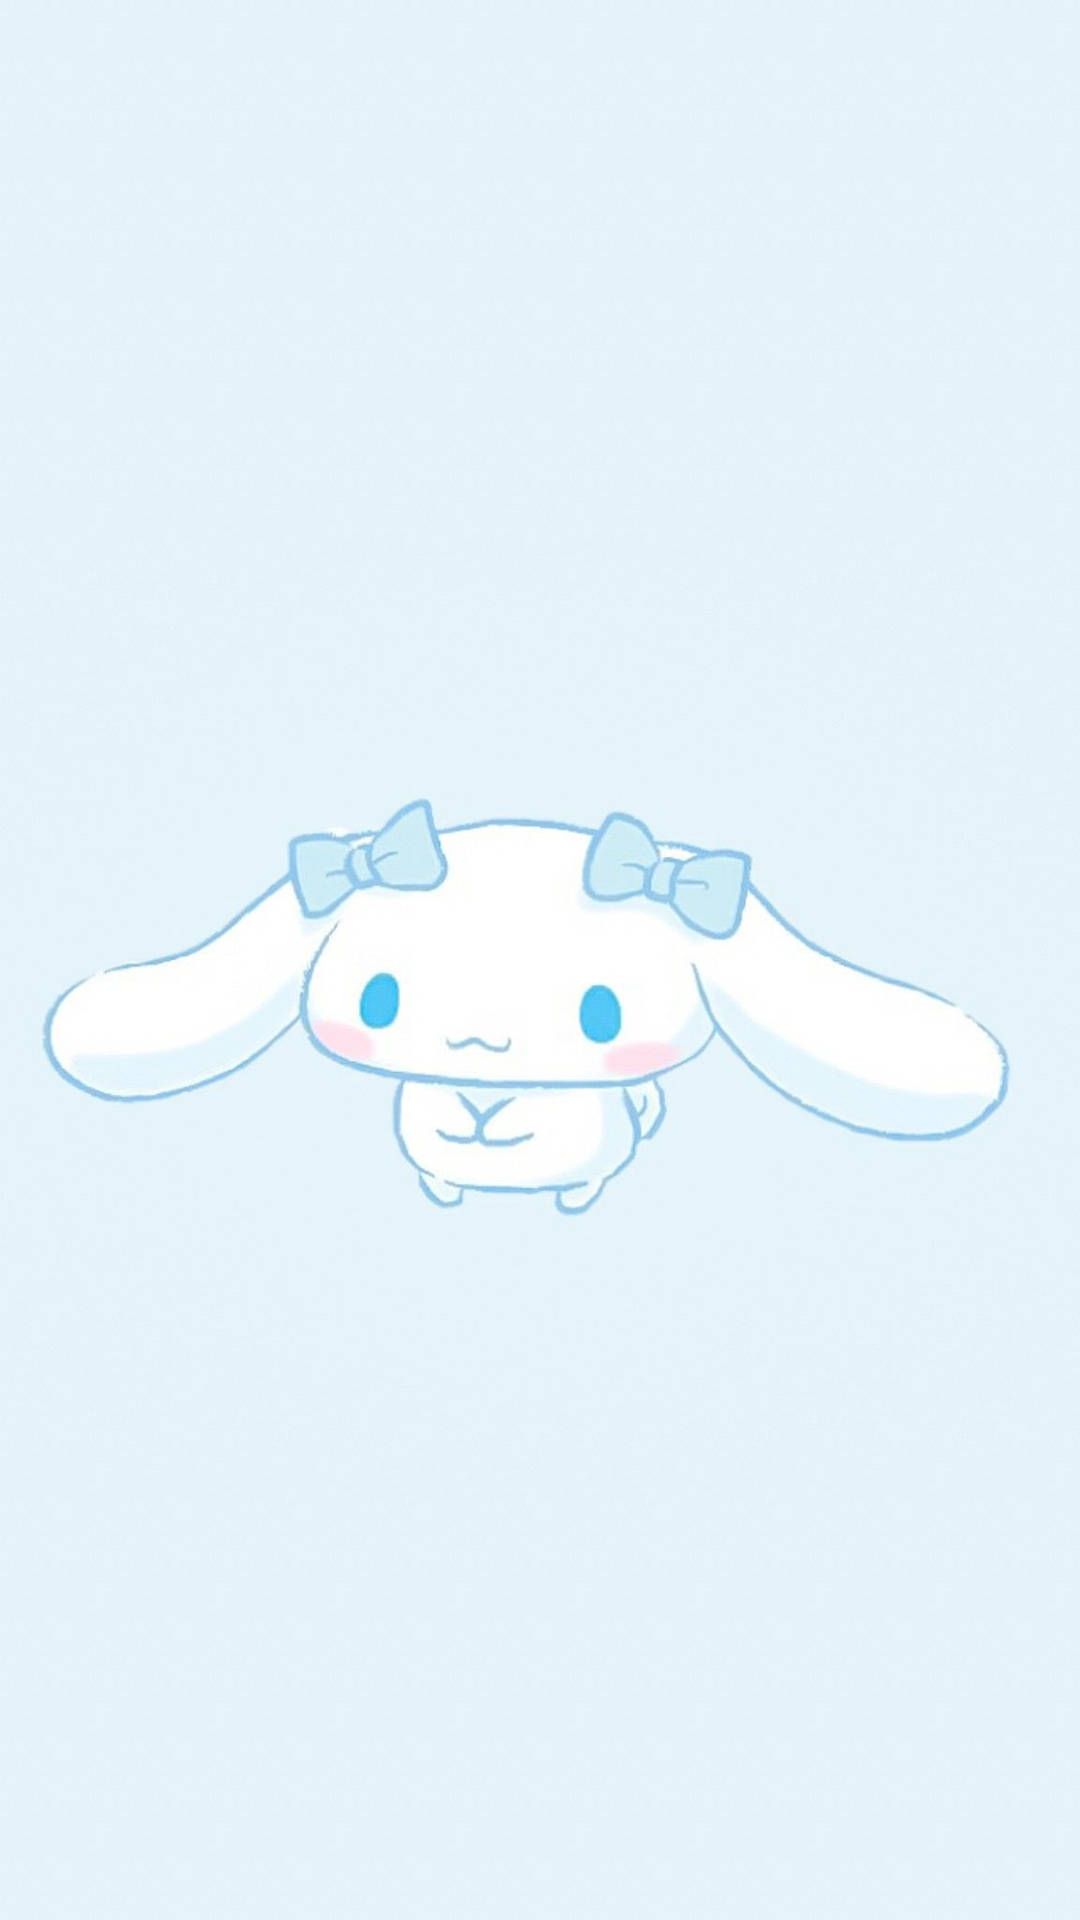 Cinnamoroll iPhone Wallpaper with high-resolution 1080x1920 pixel. You can use this wallpaper for your iPhone 5, 6, 7, 8, X, XS, XR backgrounds, Mobile Screensaver, or iPad Lock Screen - Cinnamoroll